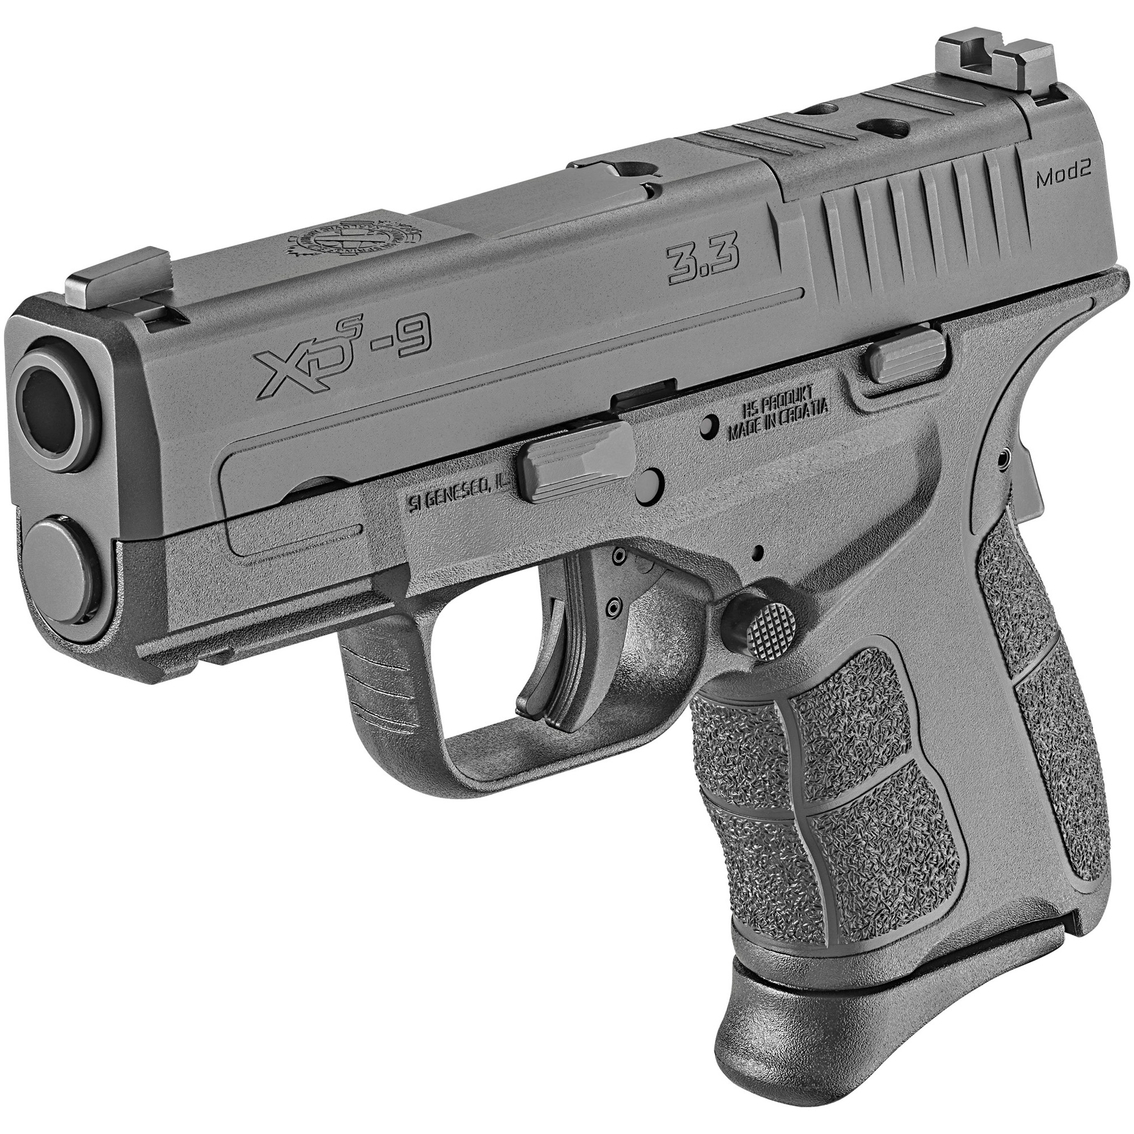 Springfield Armory XDS-Mod 2 OSP 9mm 3.3 in. Barrel Optic Ready 9 Rnd Pistol Black - Image 3 of 3